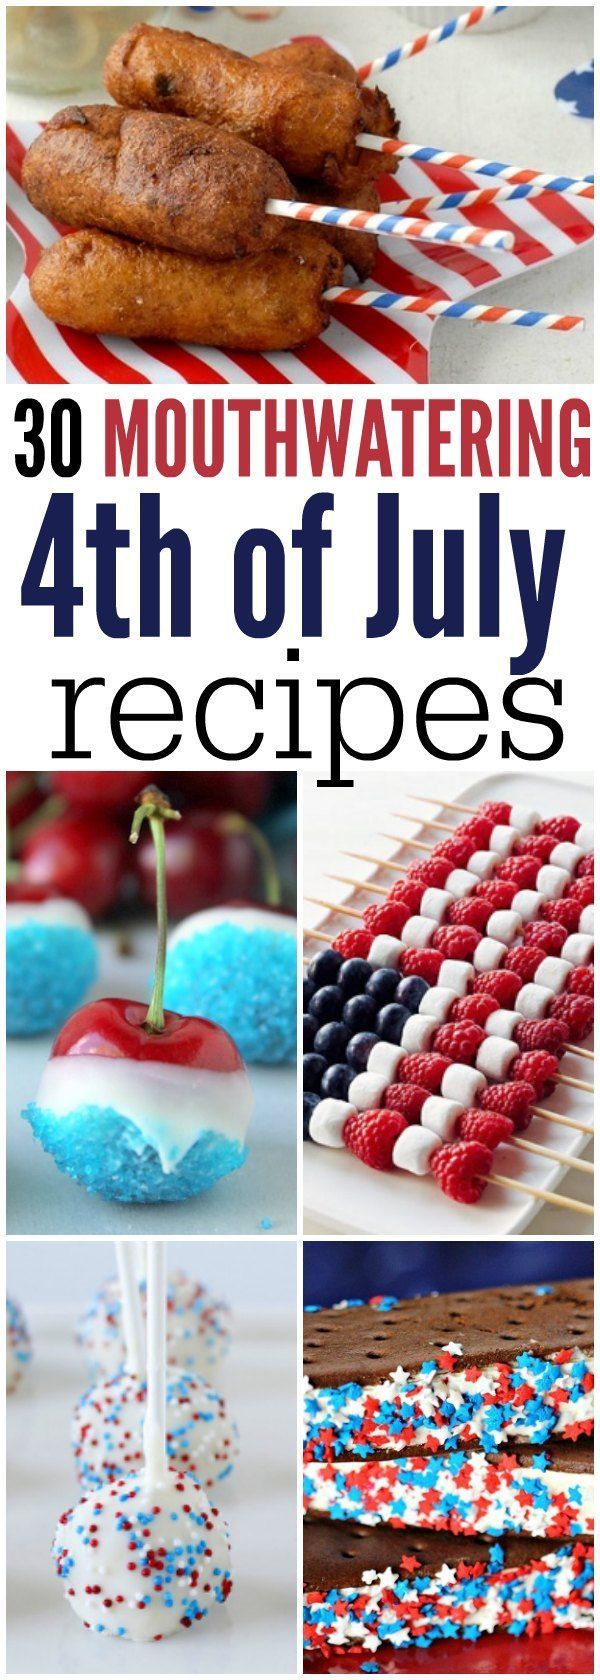 4th of July Recipes- Easy 4th of July recipes that everyone is sure to love! -   19 holiday Recipes 4th of july ideas